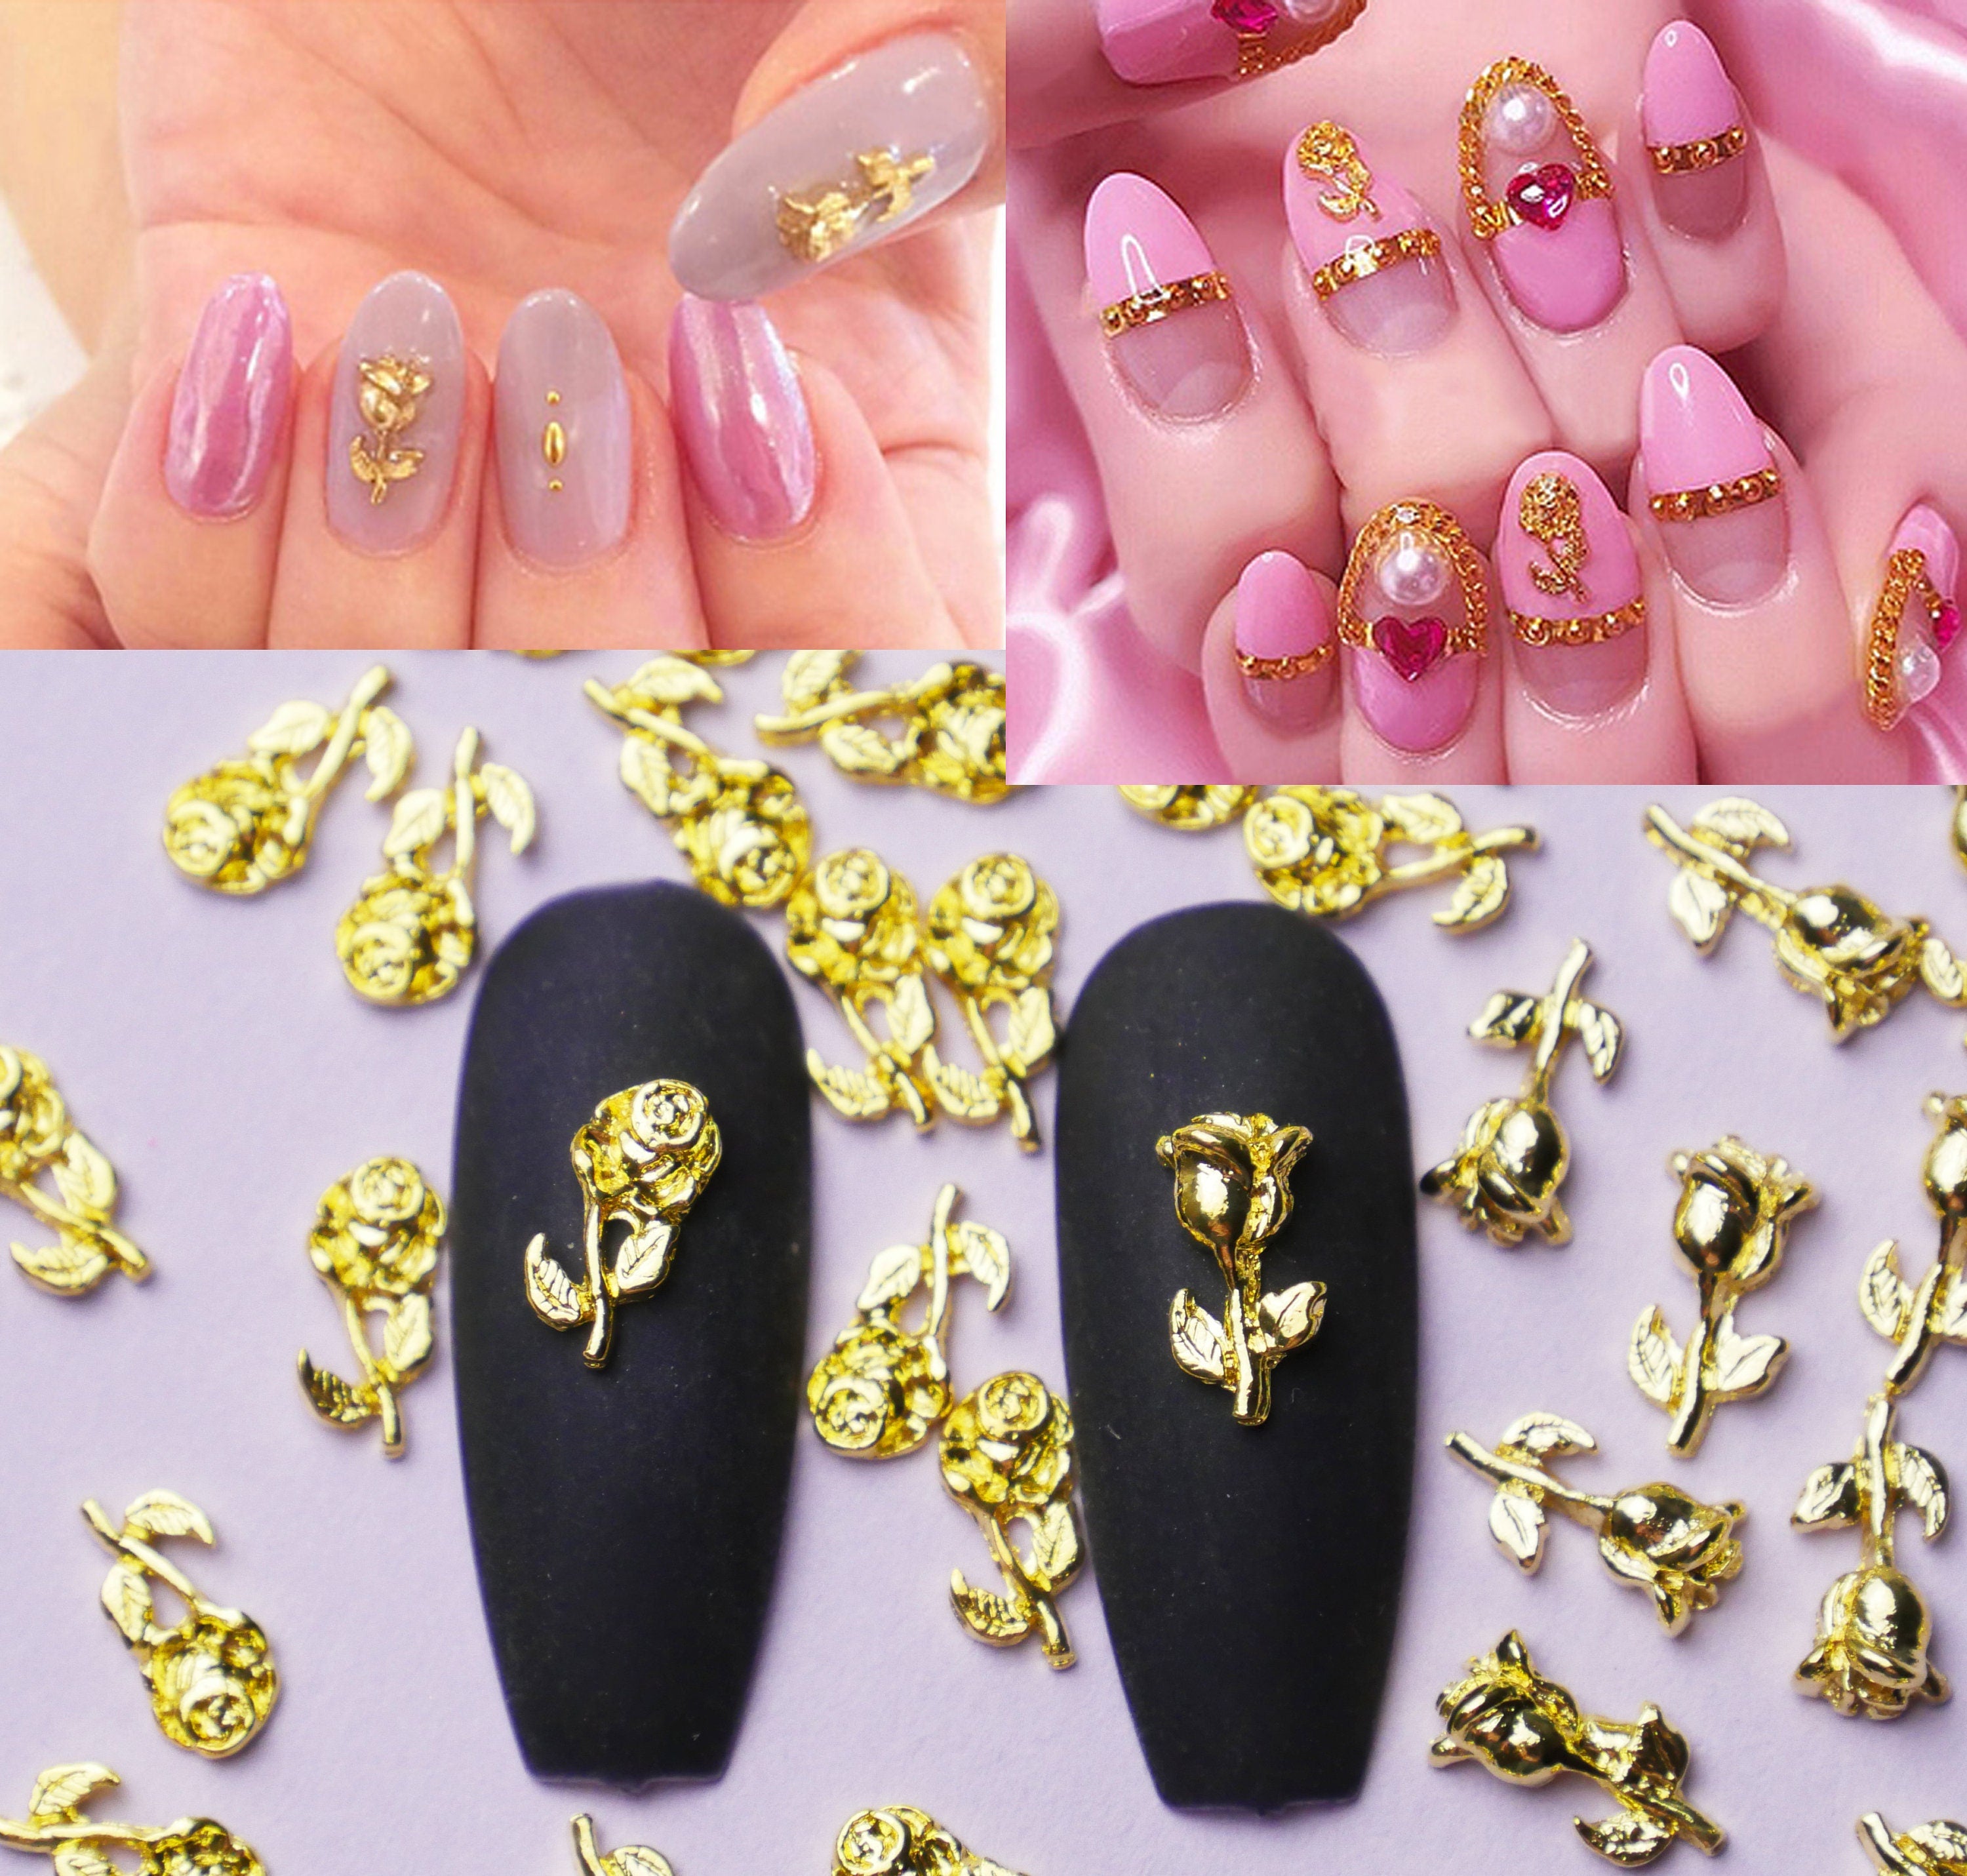 7 Flower Nail Art Designs for Your Inspiration